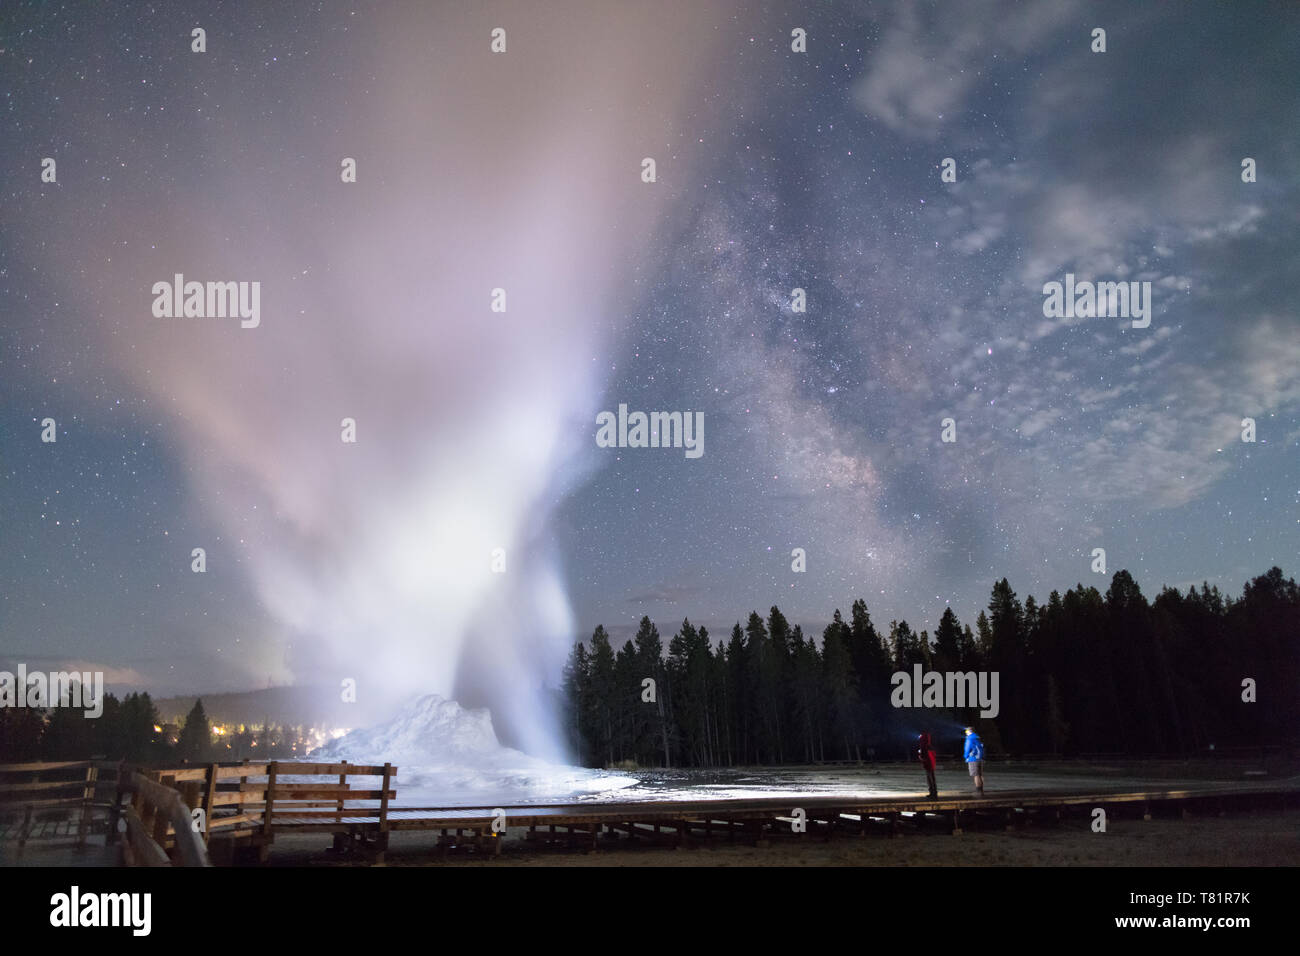 Castle Geyser, Yellowstone, a notte Foto Stock